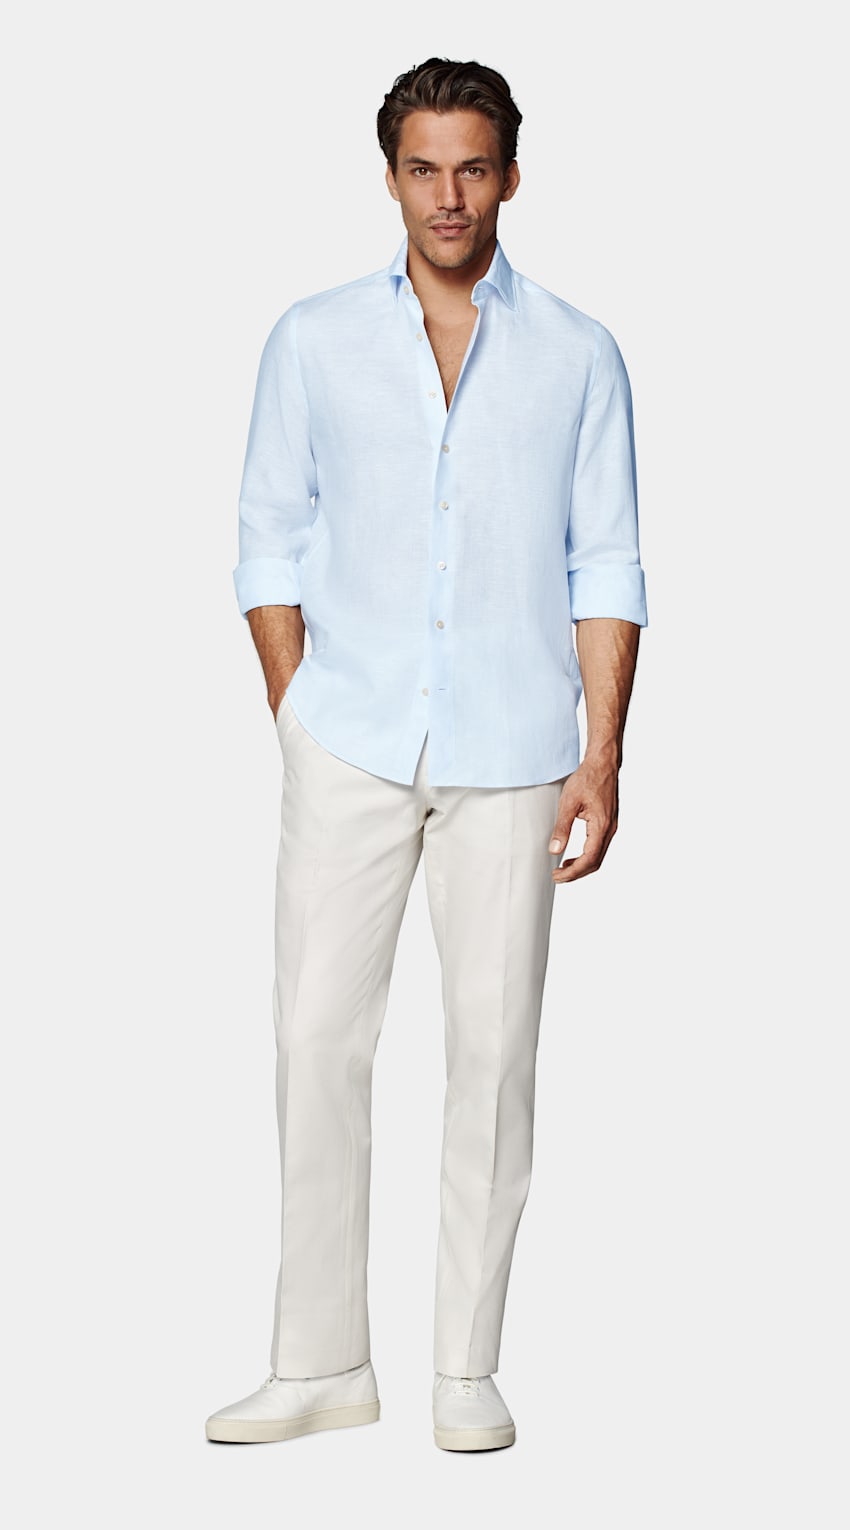 SUITSUPPLY Pure Linen by Albini, Italy Light Blue Slim Fit Shirt